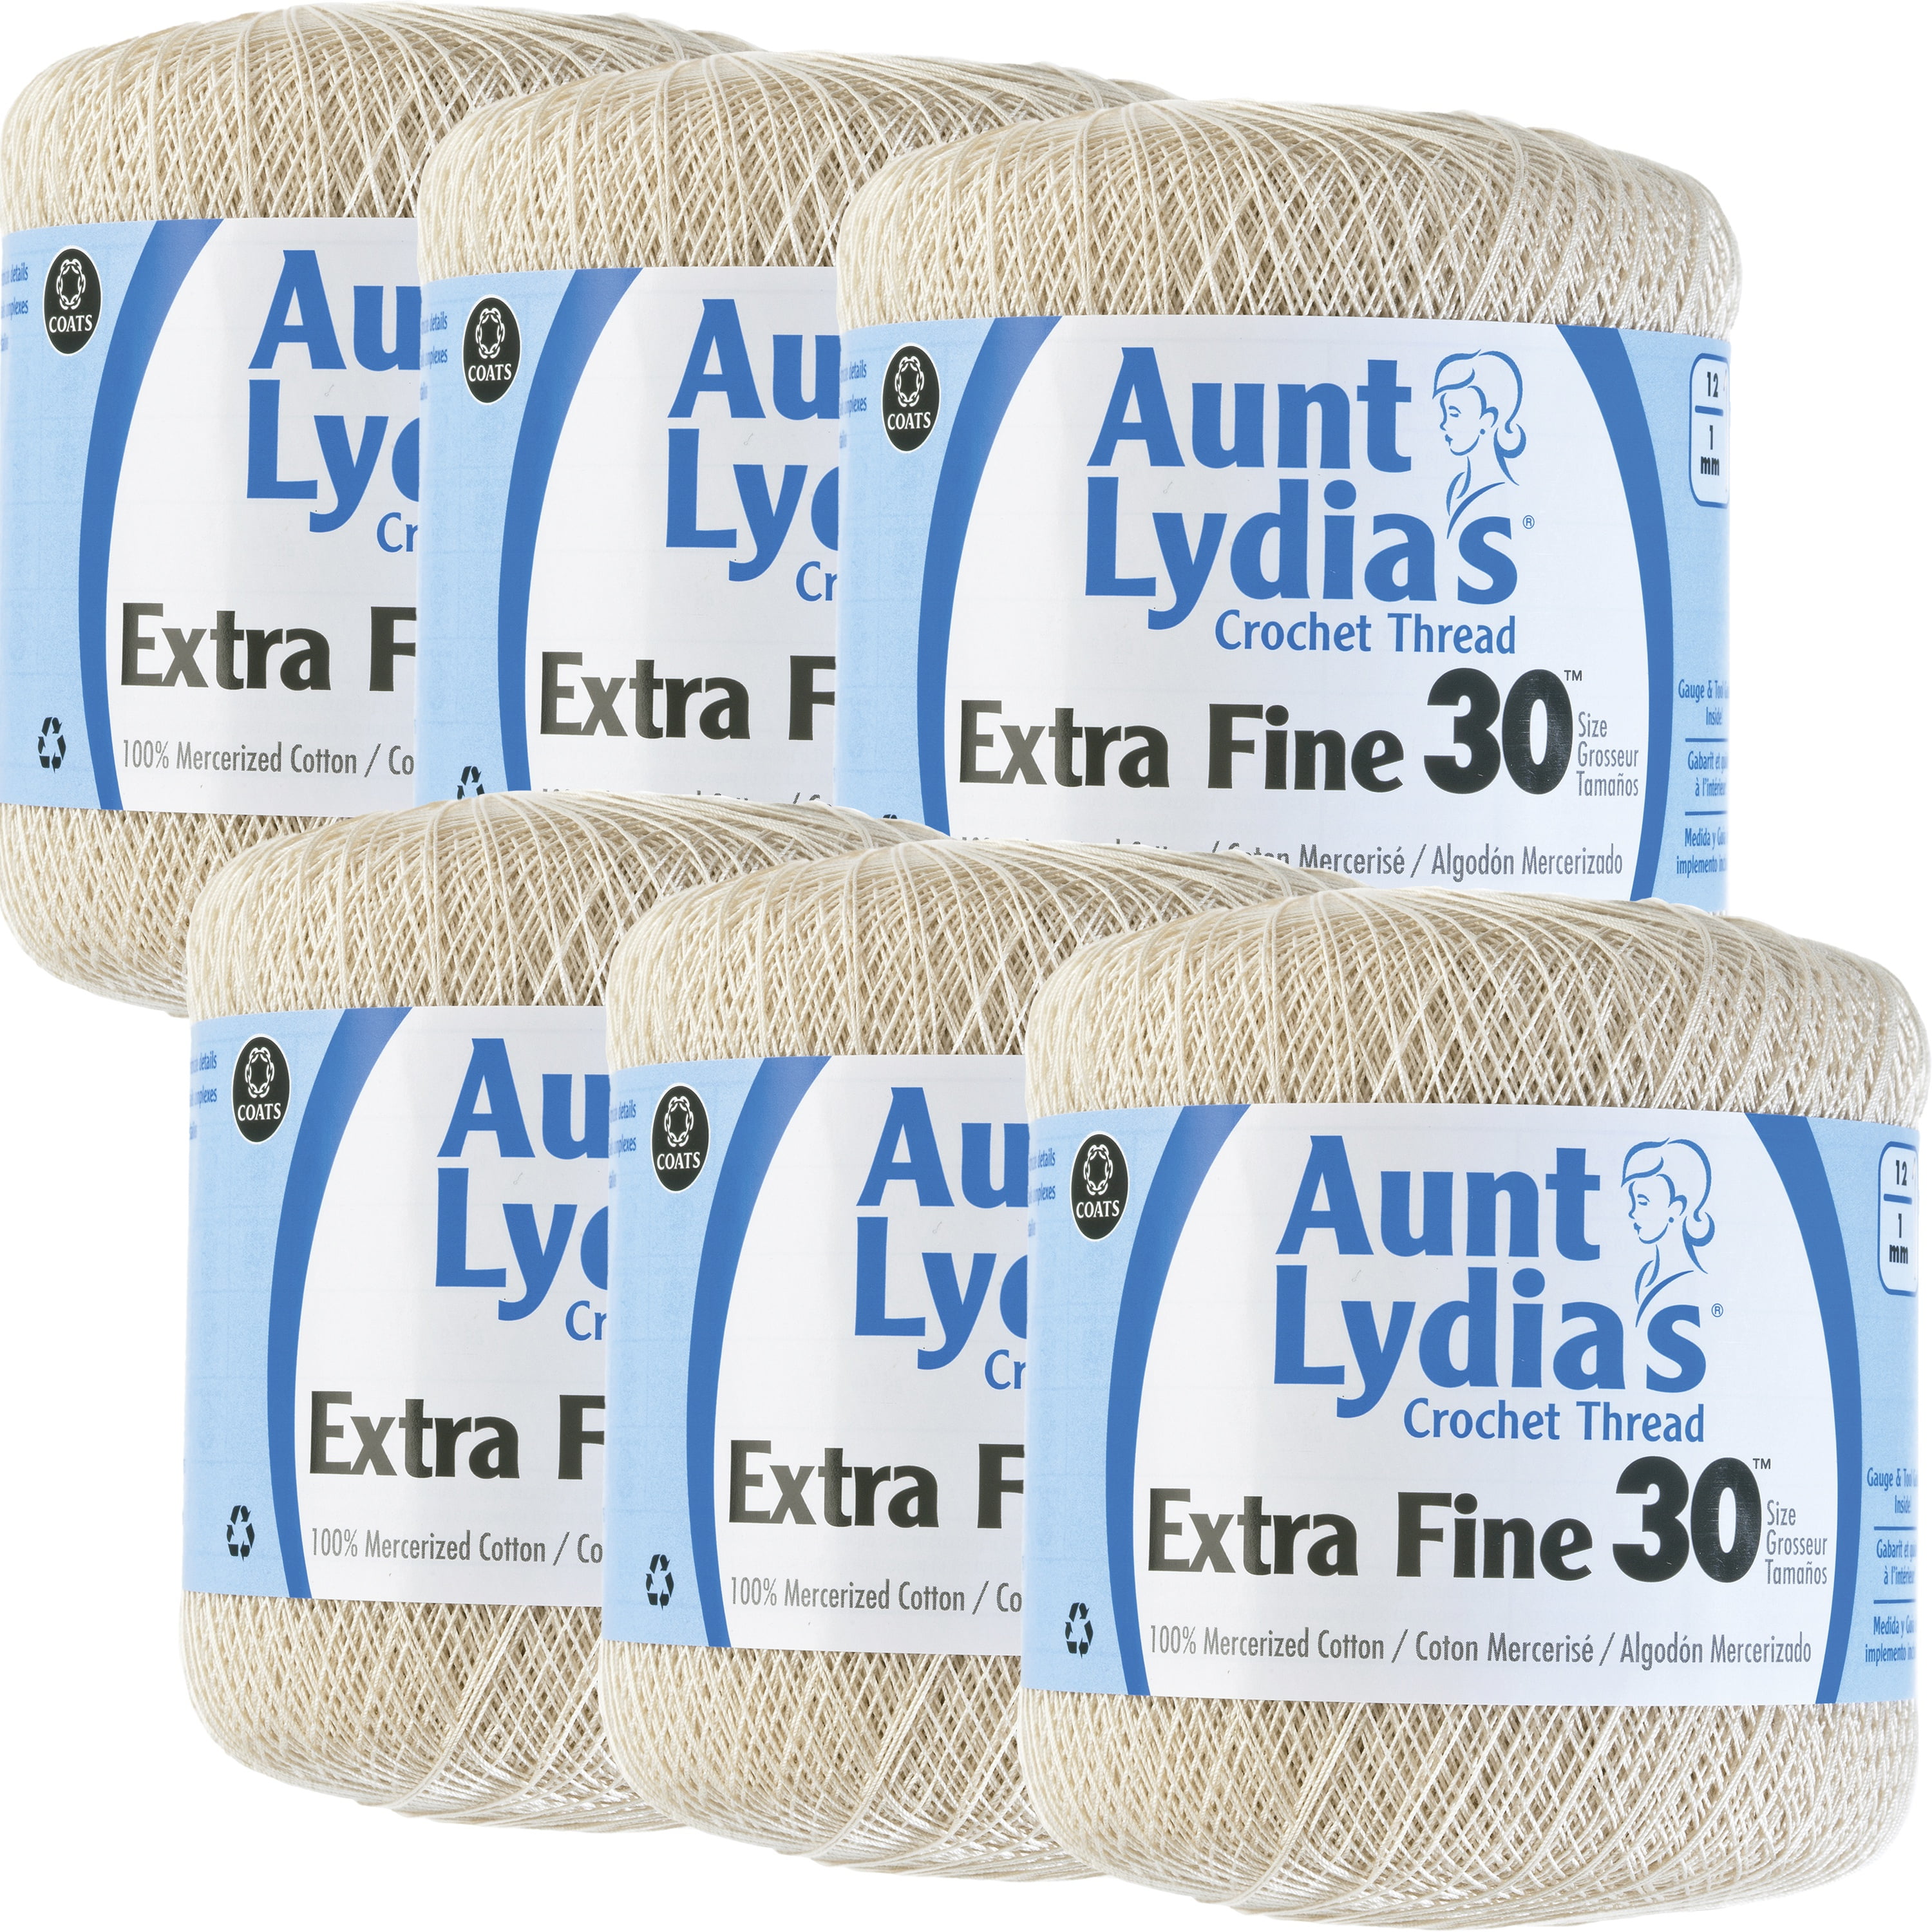 Multipack of 12 - Aunt Lydia's Fashion Crochet Thread Size 3-White